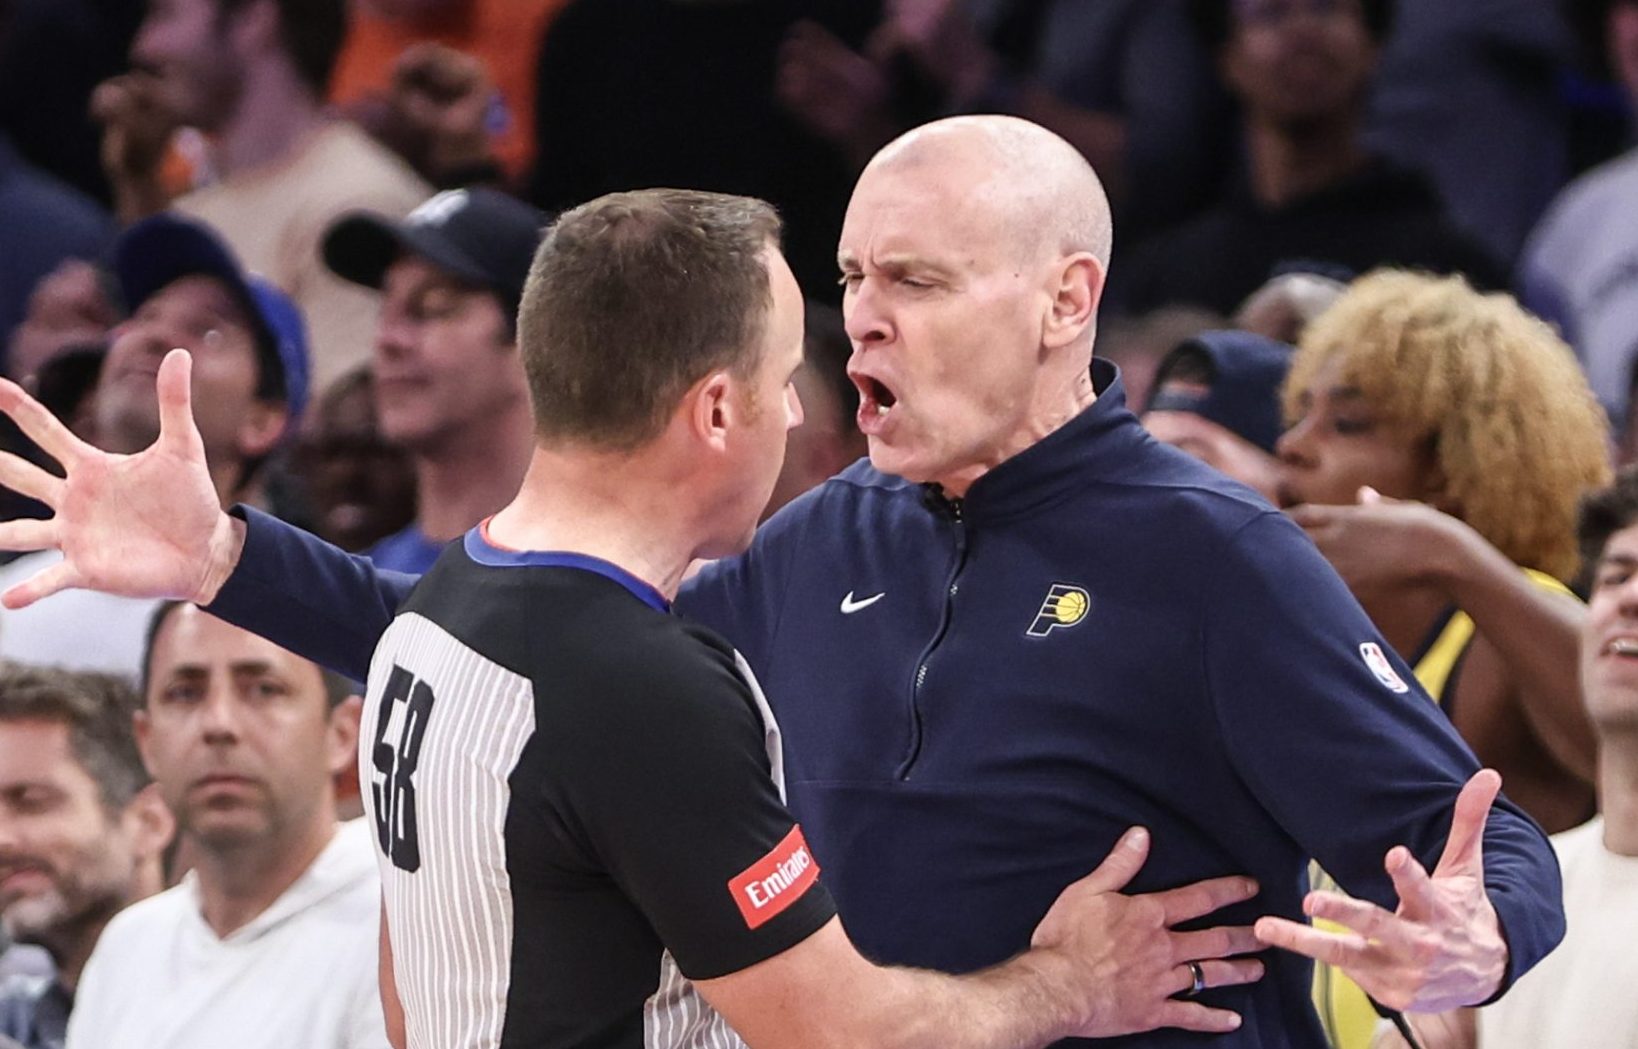 pacers coach calls out referees